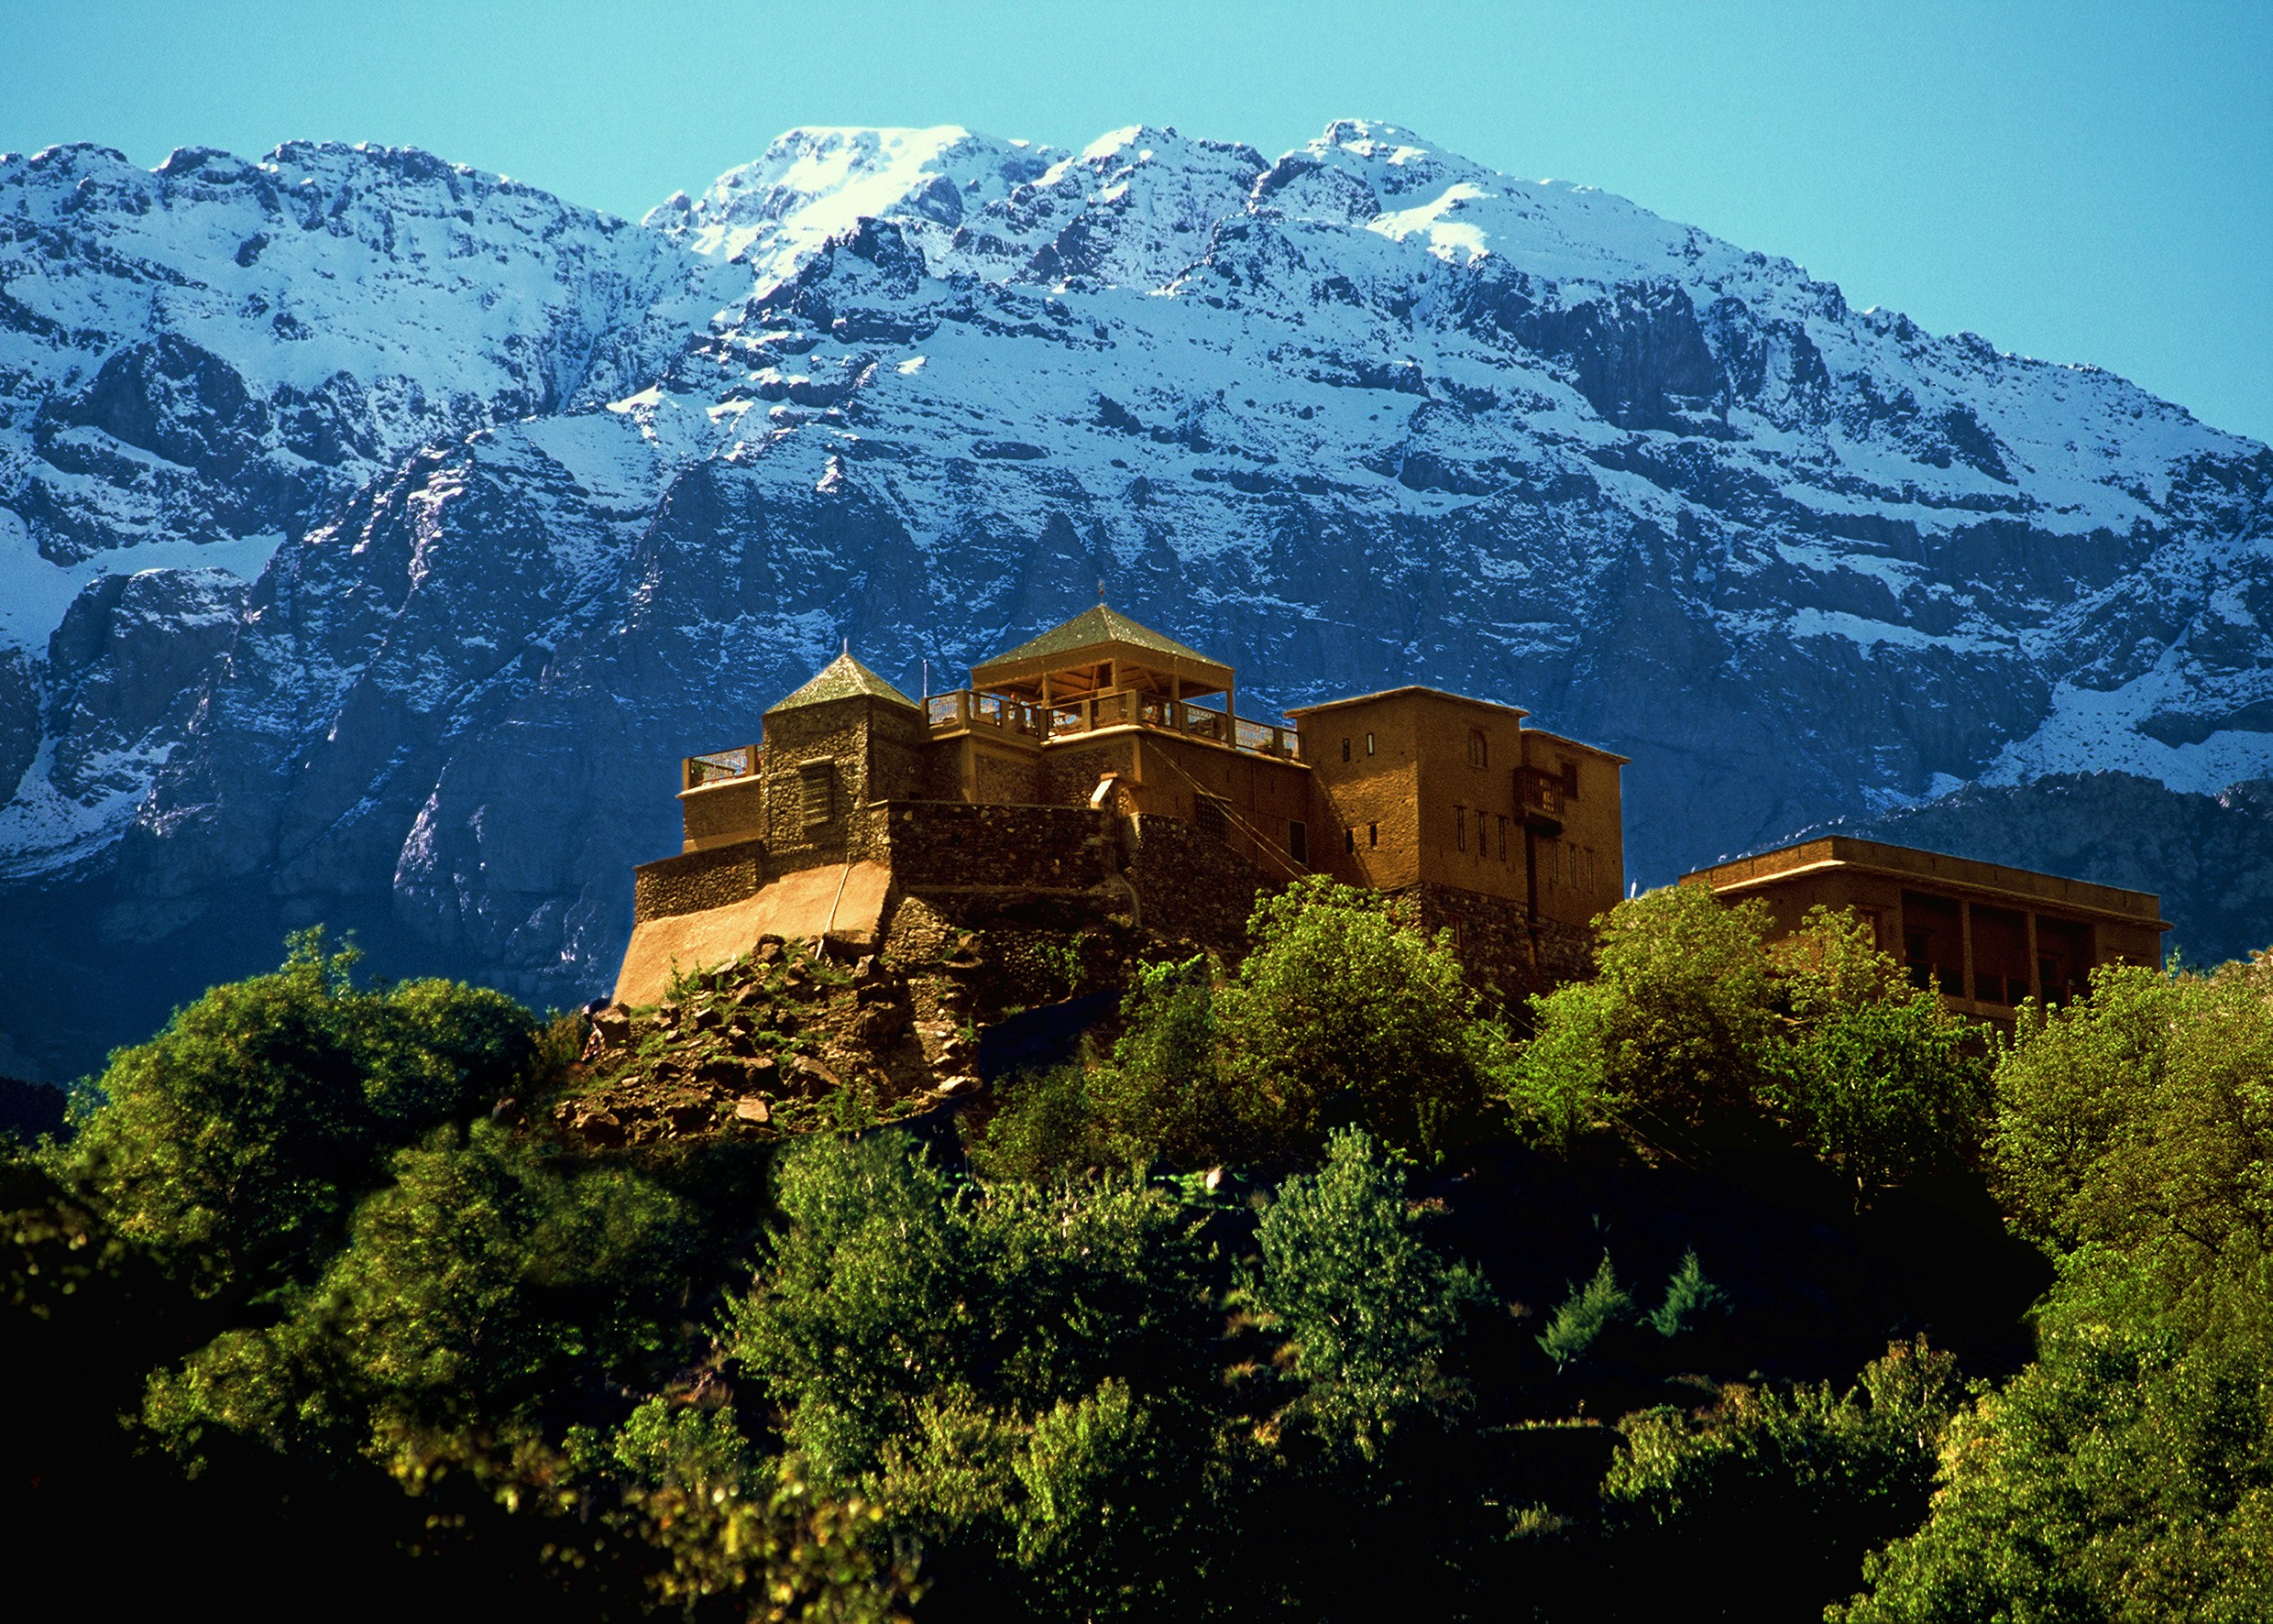 1 Day Trip To Imlil Valley & Atlas Mountains From Marrakech